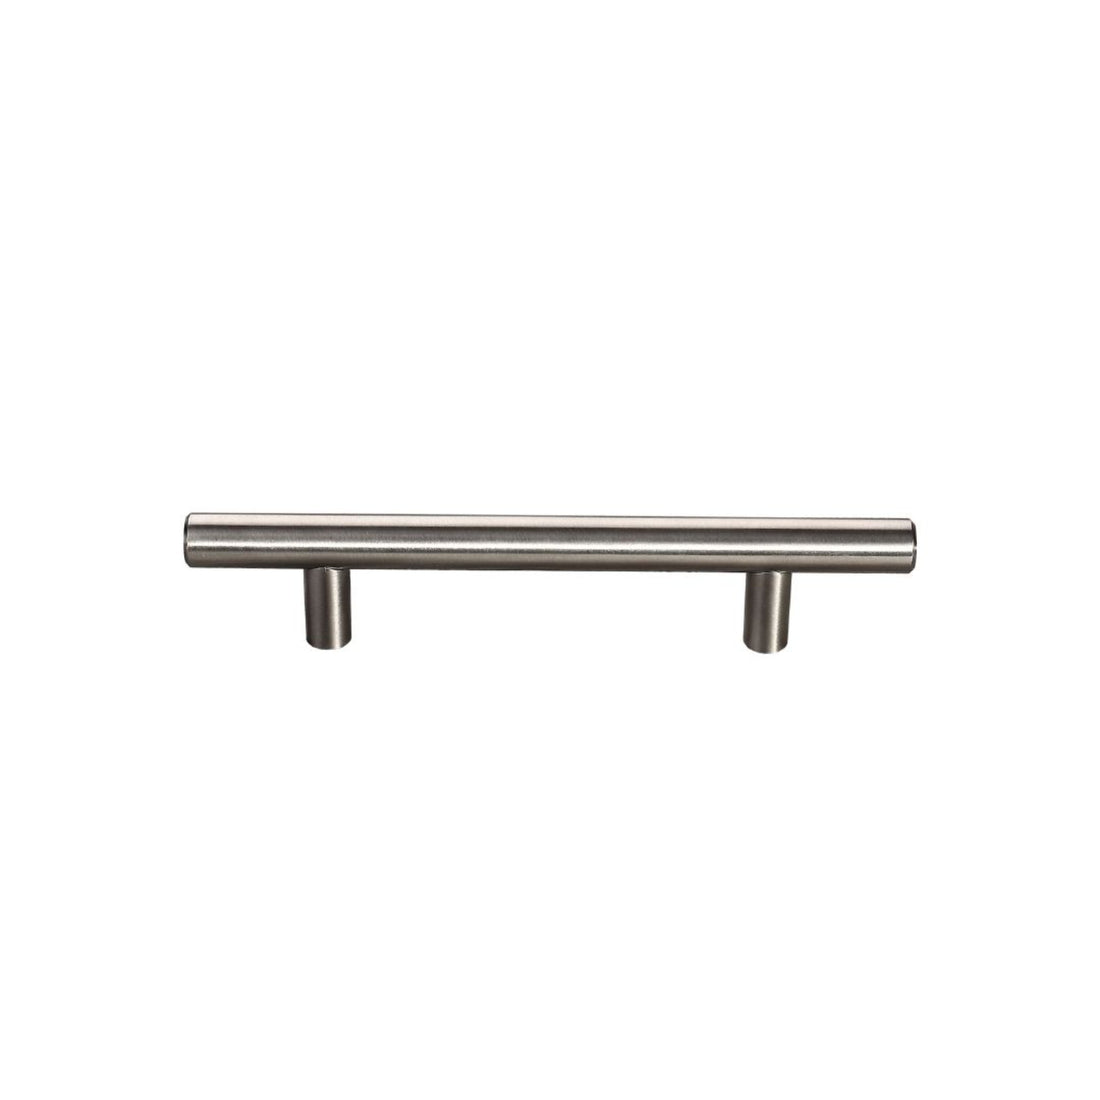 Hollow Series 3-3/4 in. Center-to-Center Modern Stainless Steel Cabinet Pull (20-Pack) -  Pro-Edge HD